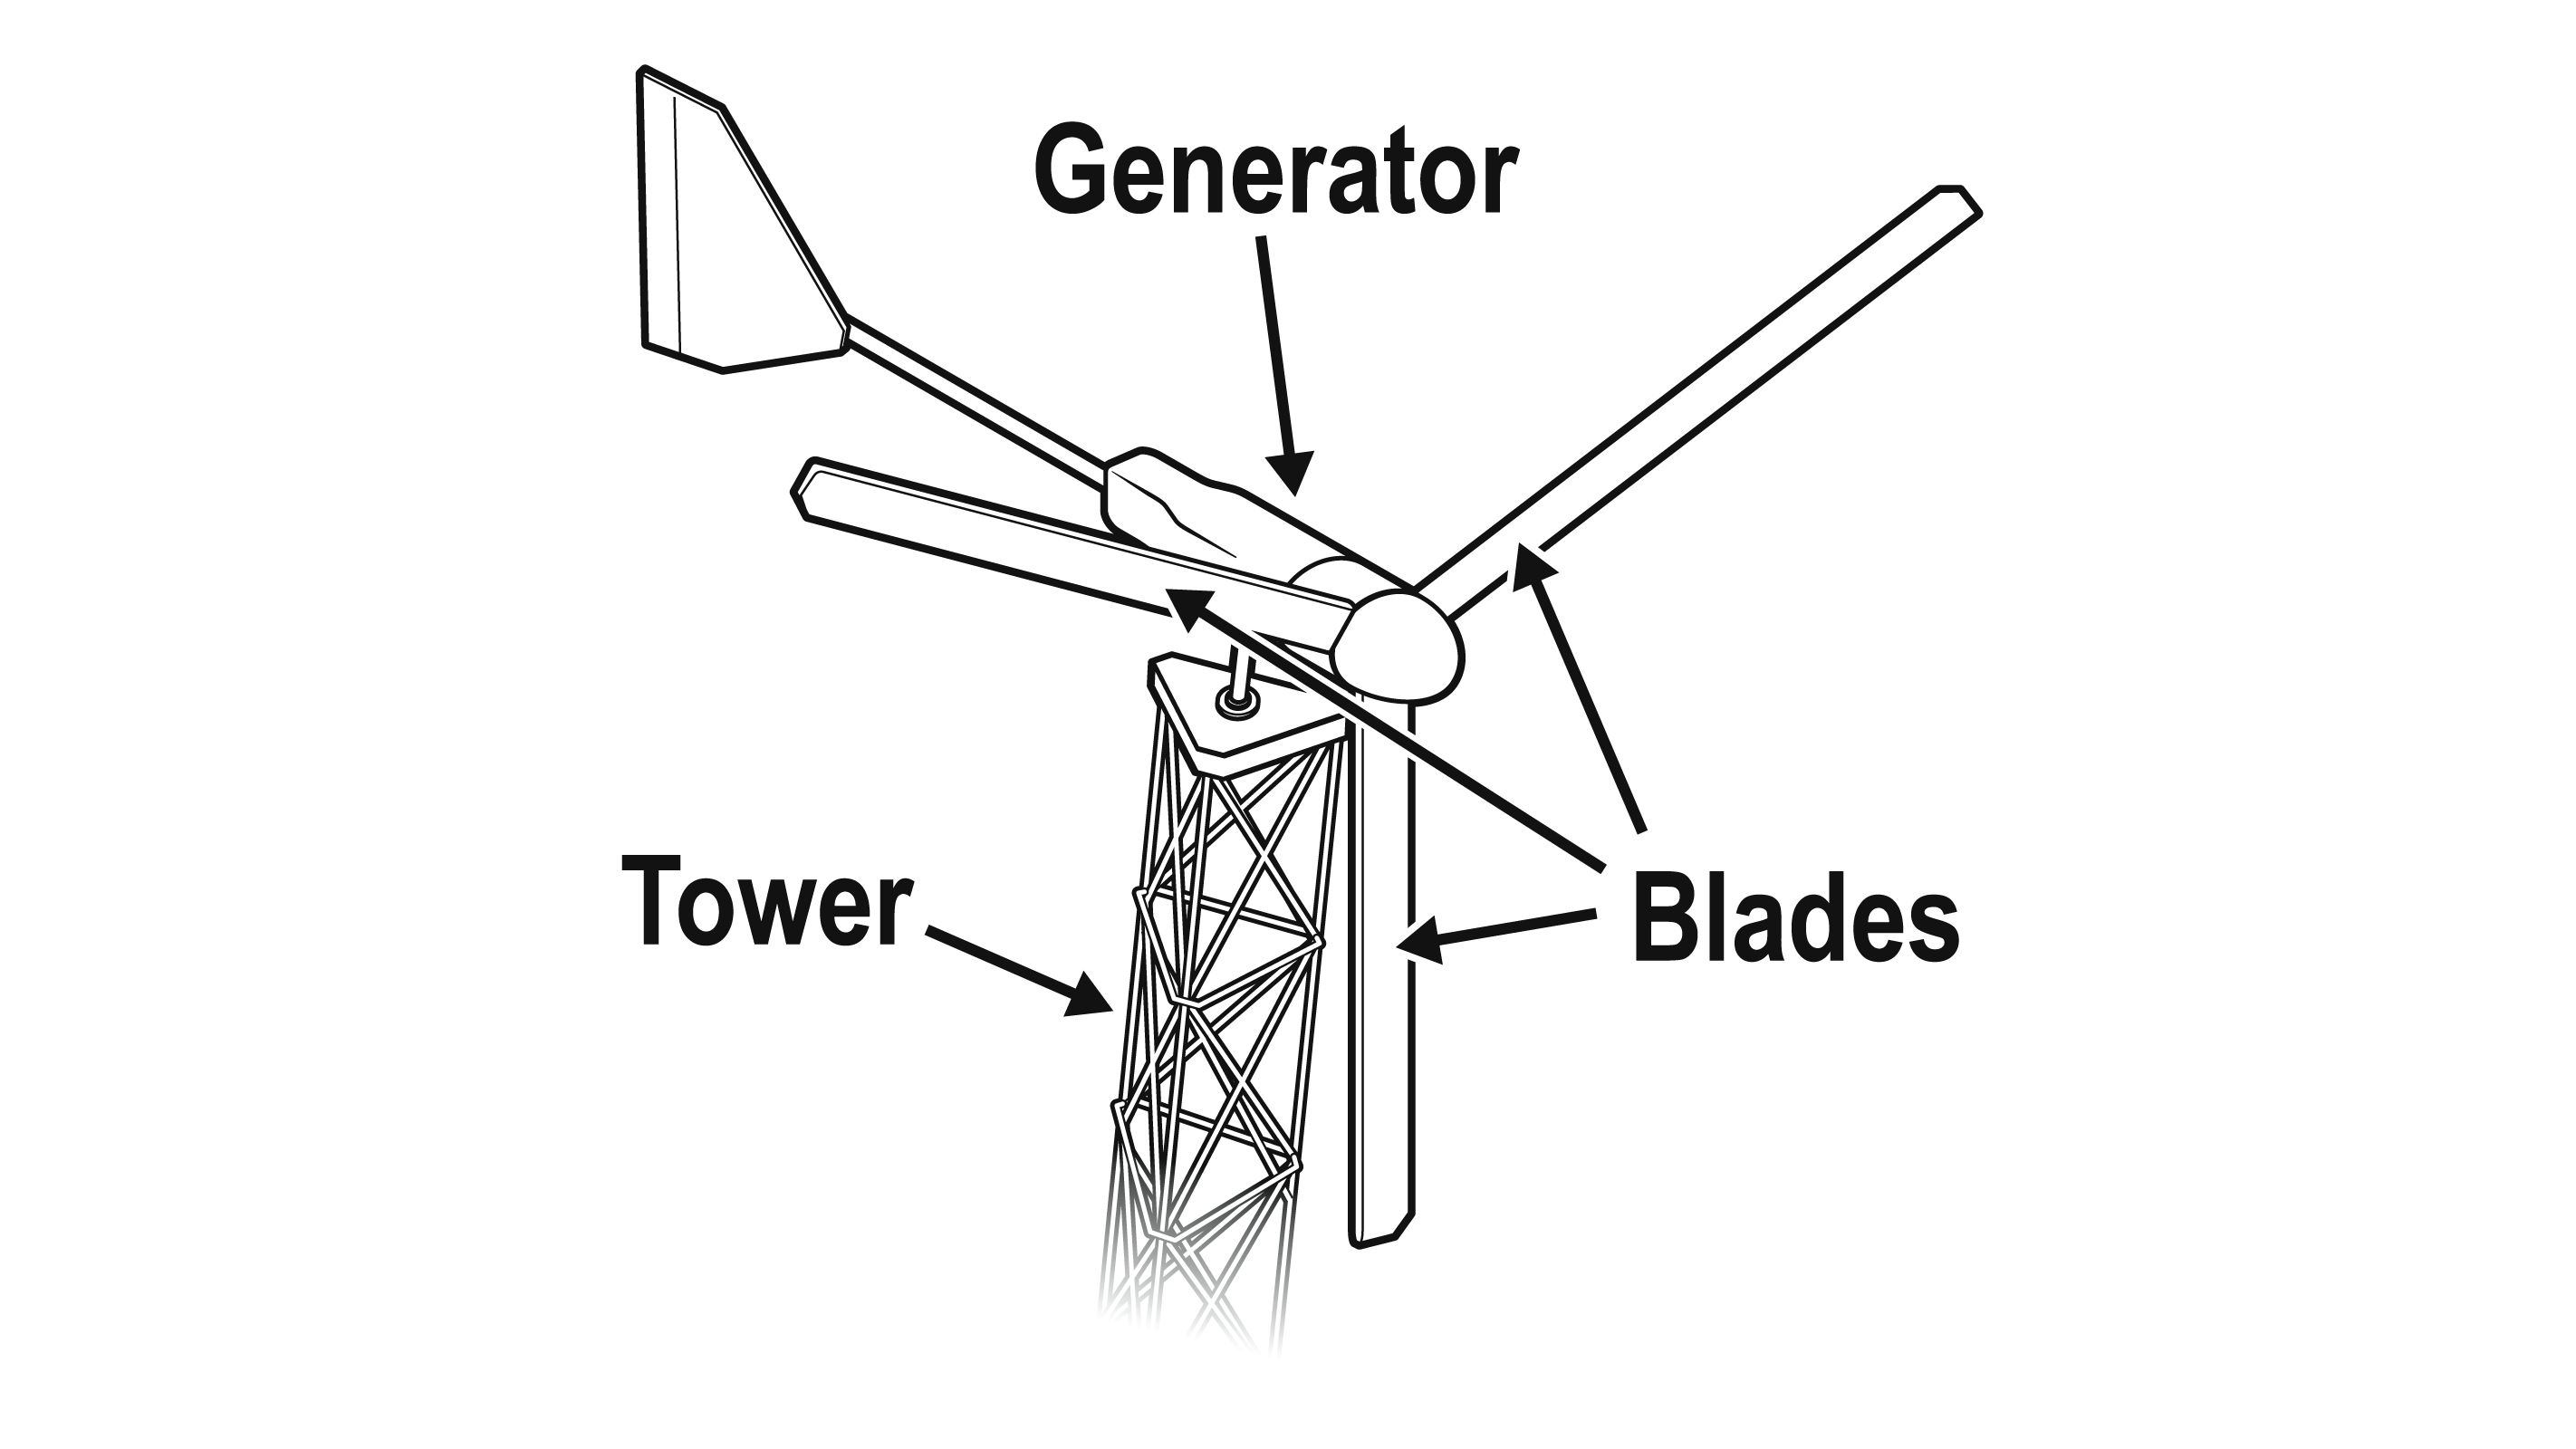 Electric fan inspires design of home-use wind power generator